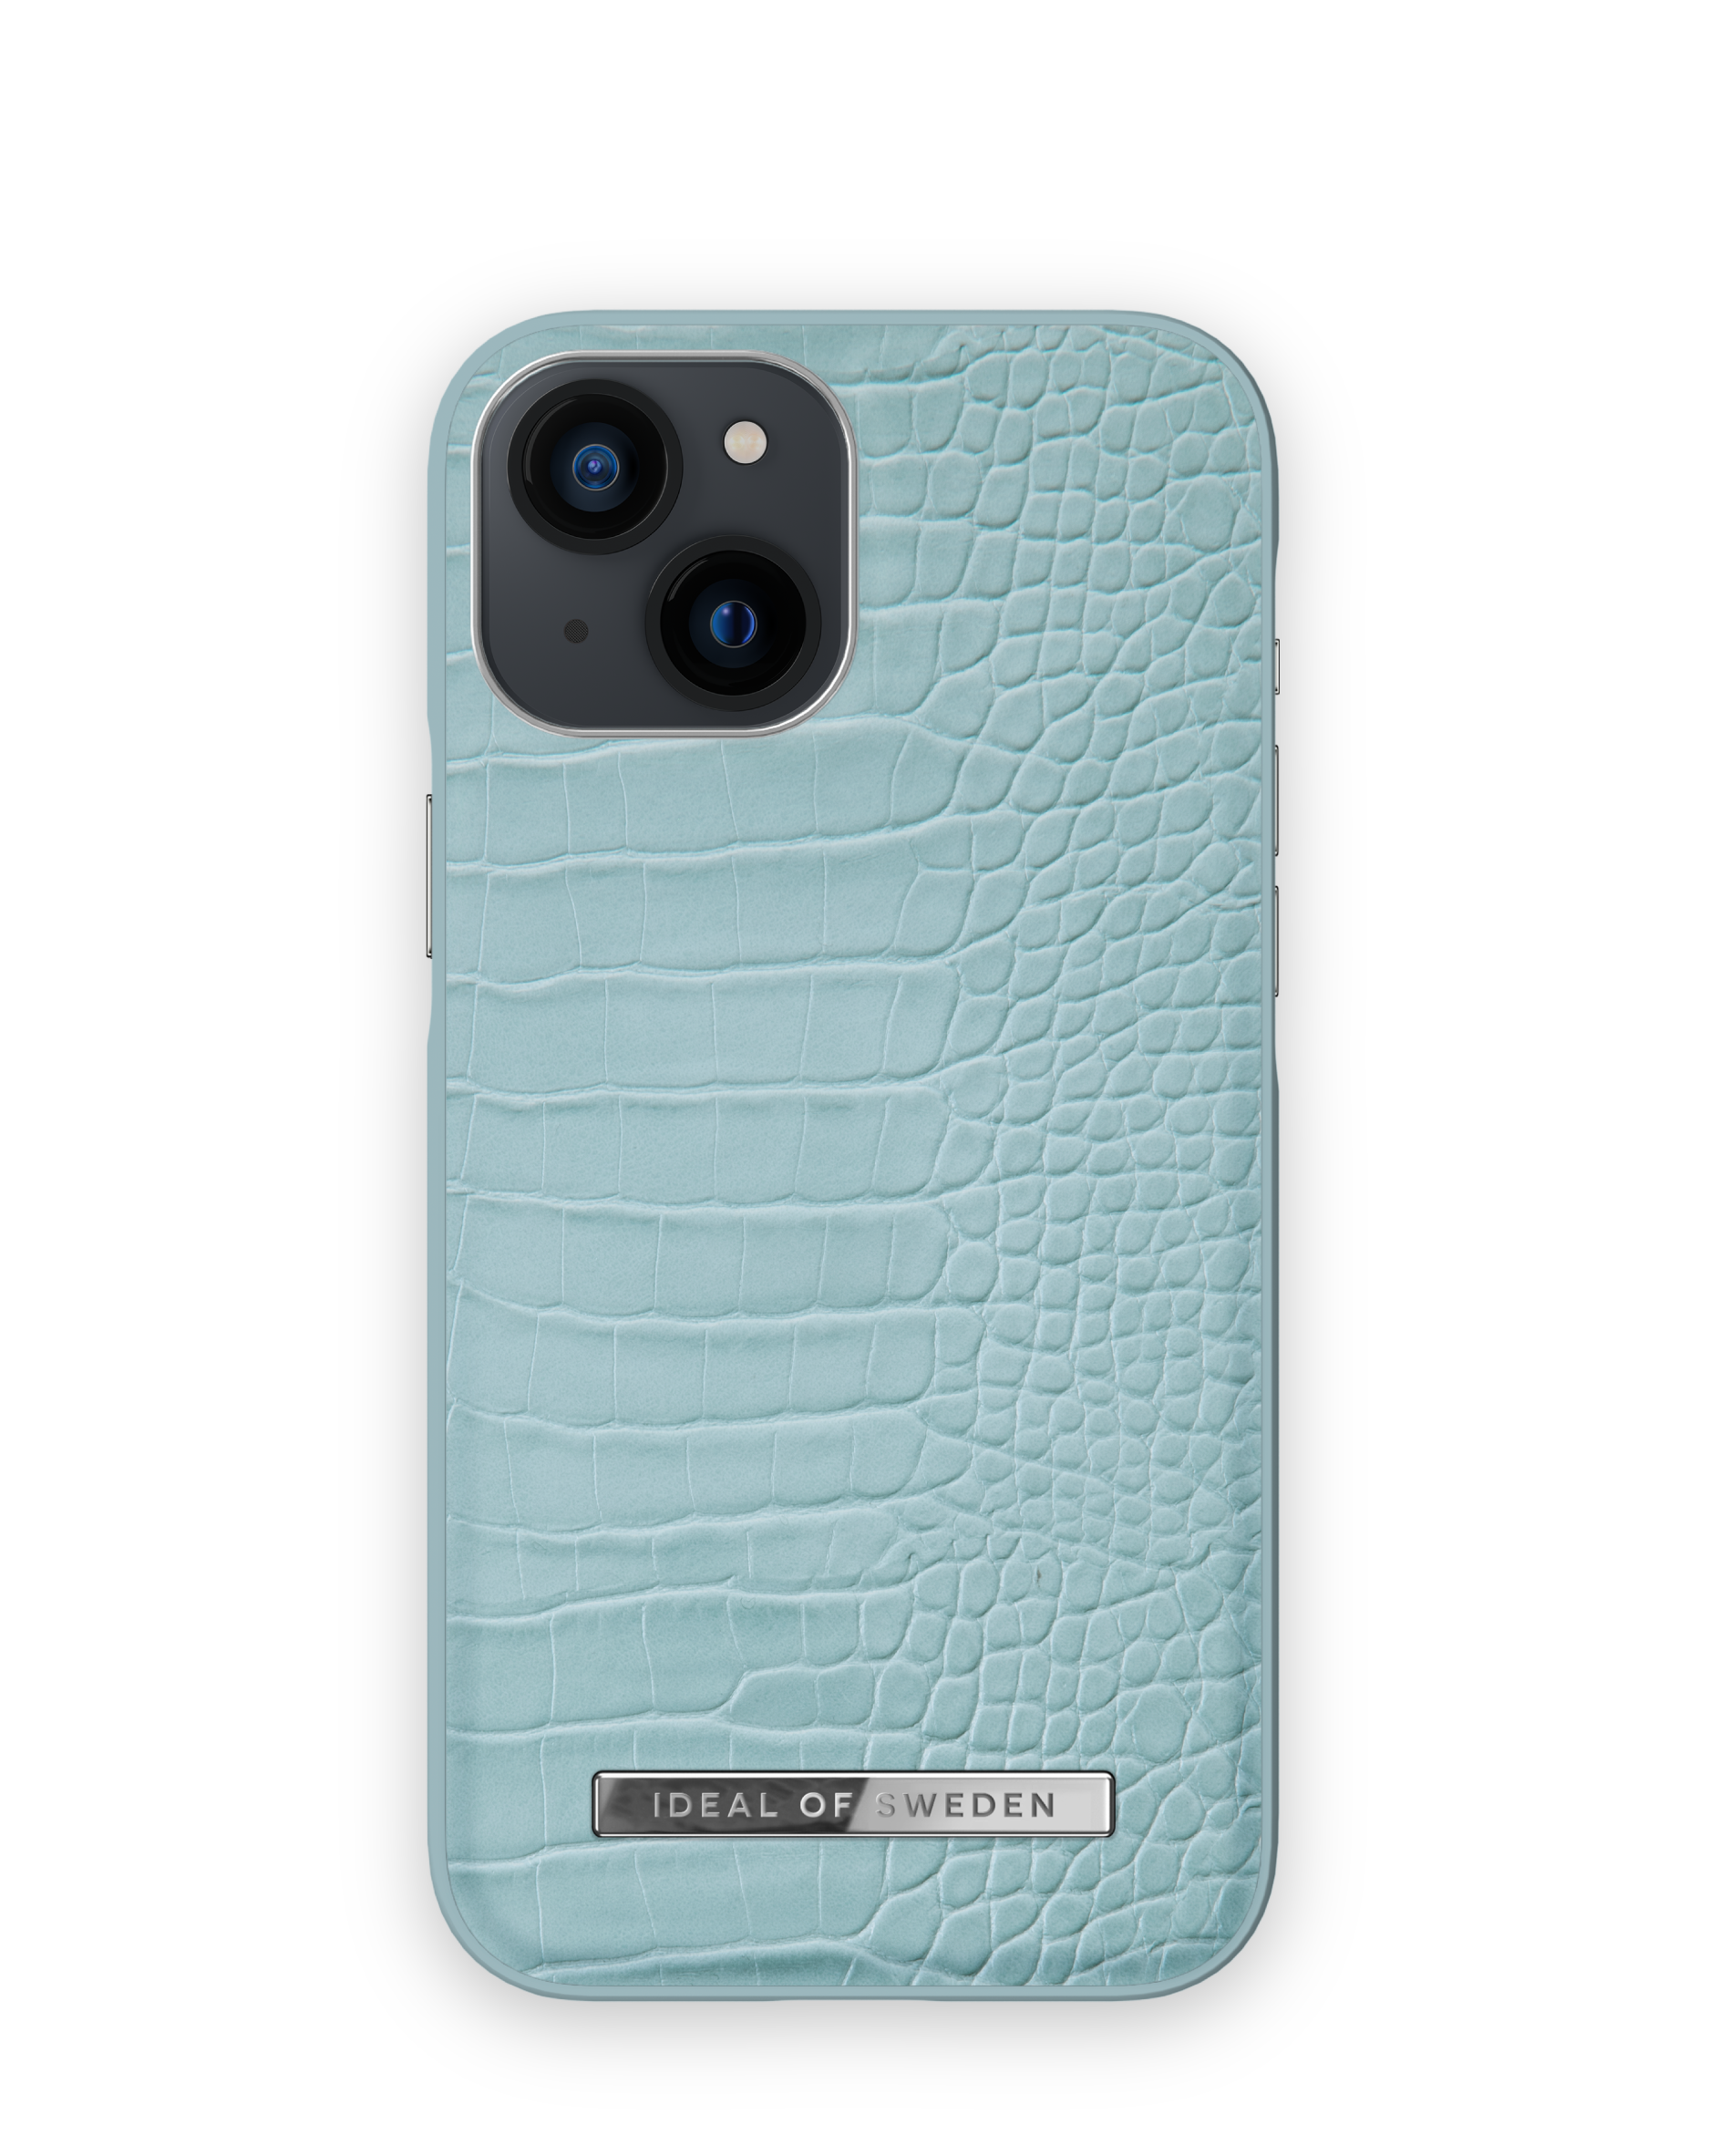 Blue iPhone Mini, SWEDEN OF IDACSS22-I2154-394, Backcover, Soft Croco 13 IDEAL Apple,